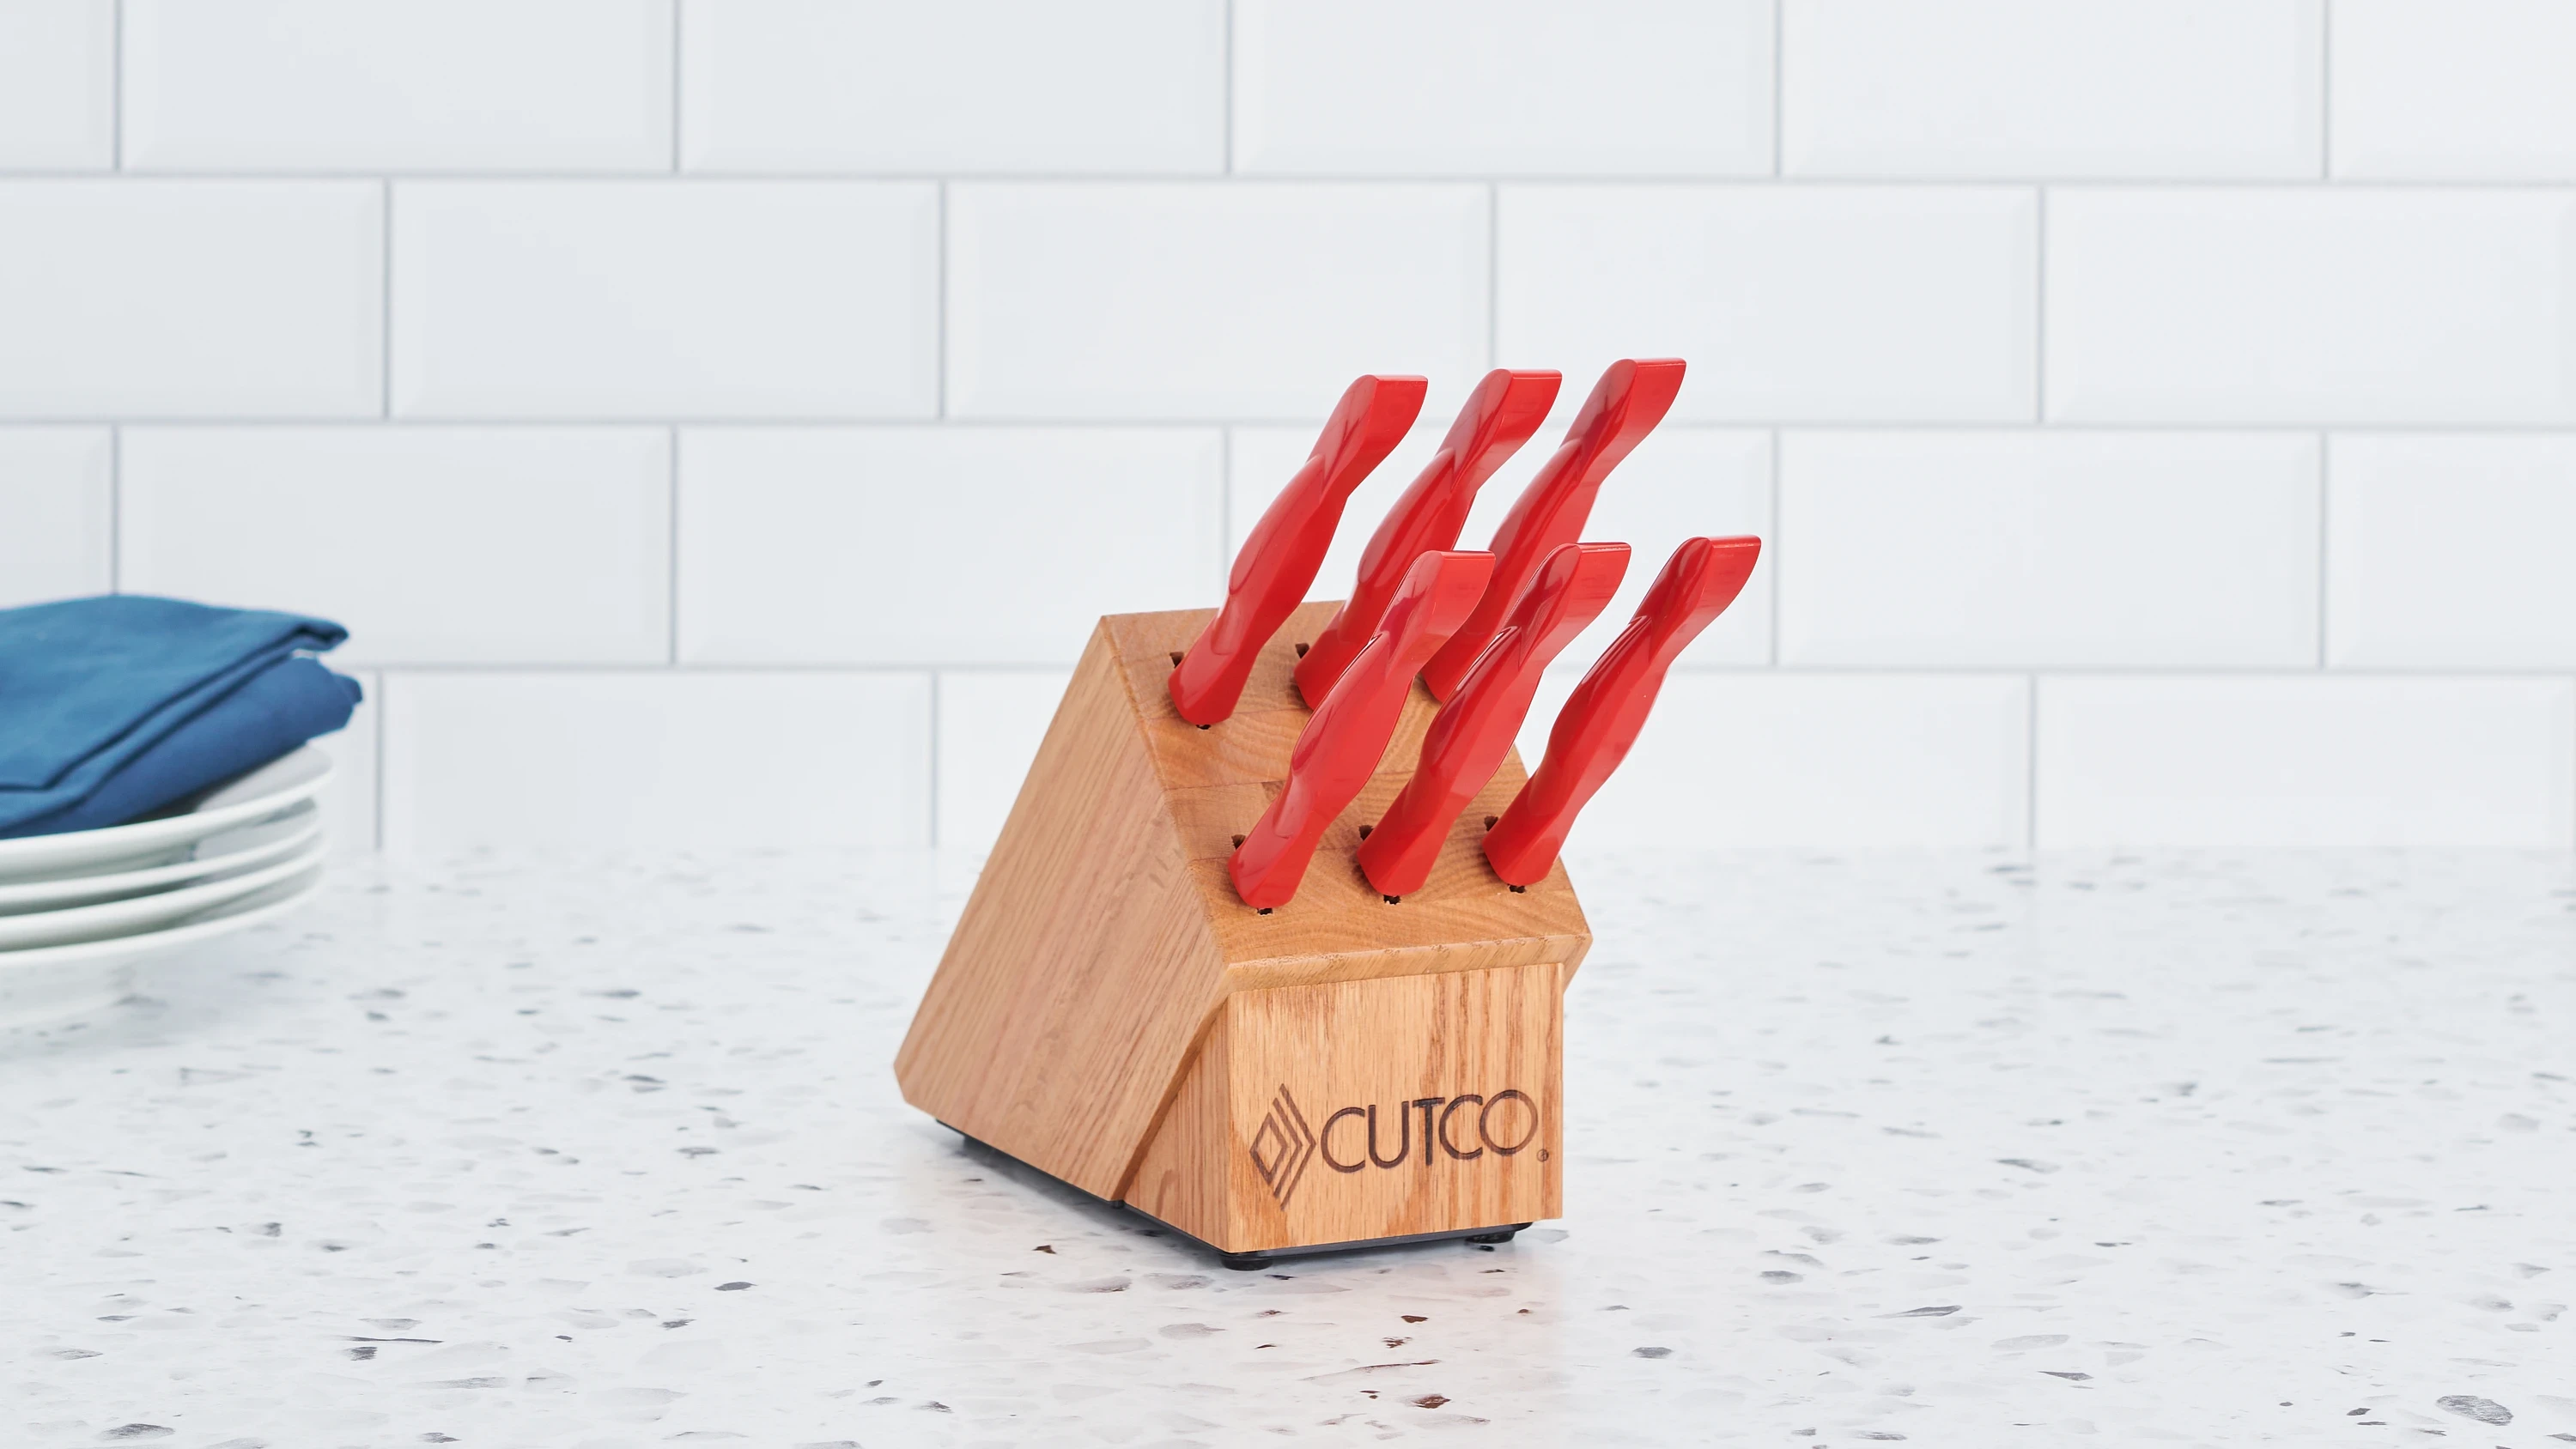 Studio Set with Block, 6 Pieces, Knife Block Sets by Cutco